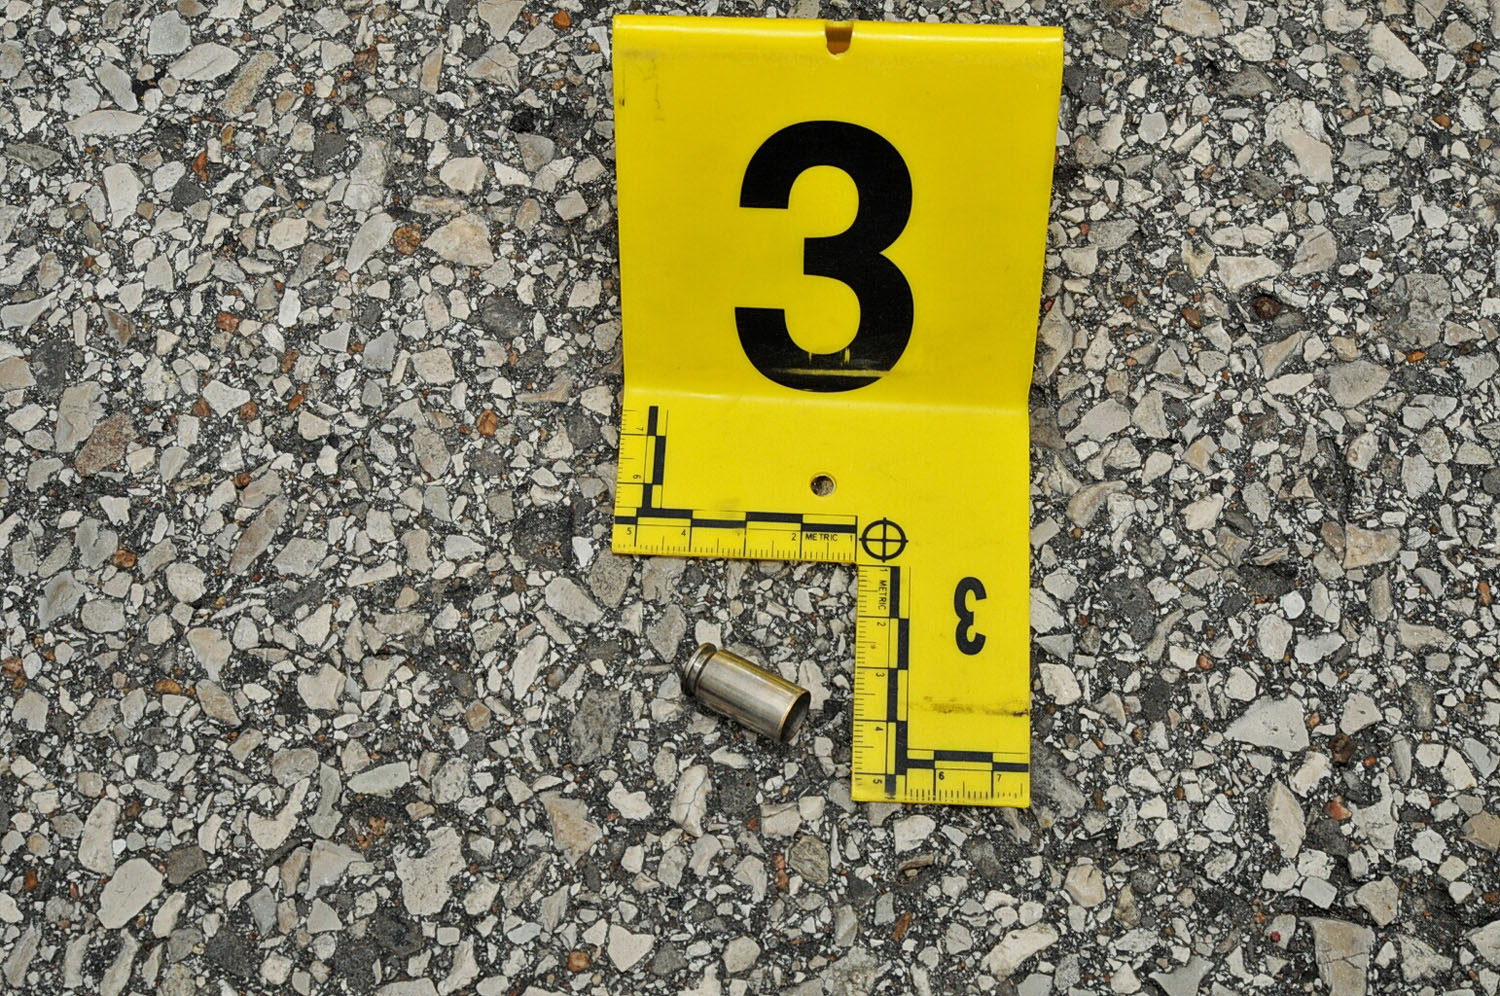 An undated evidence photograph made available by the St. Louis County prosecutors office on Nov. 25, 2014 shows the a bullet casing from the gun of Ferguson police officer Darren Wilson that was used in the shooting death of teenager Michael Brown in August 2014.